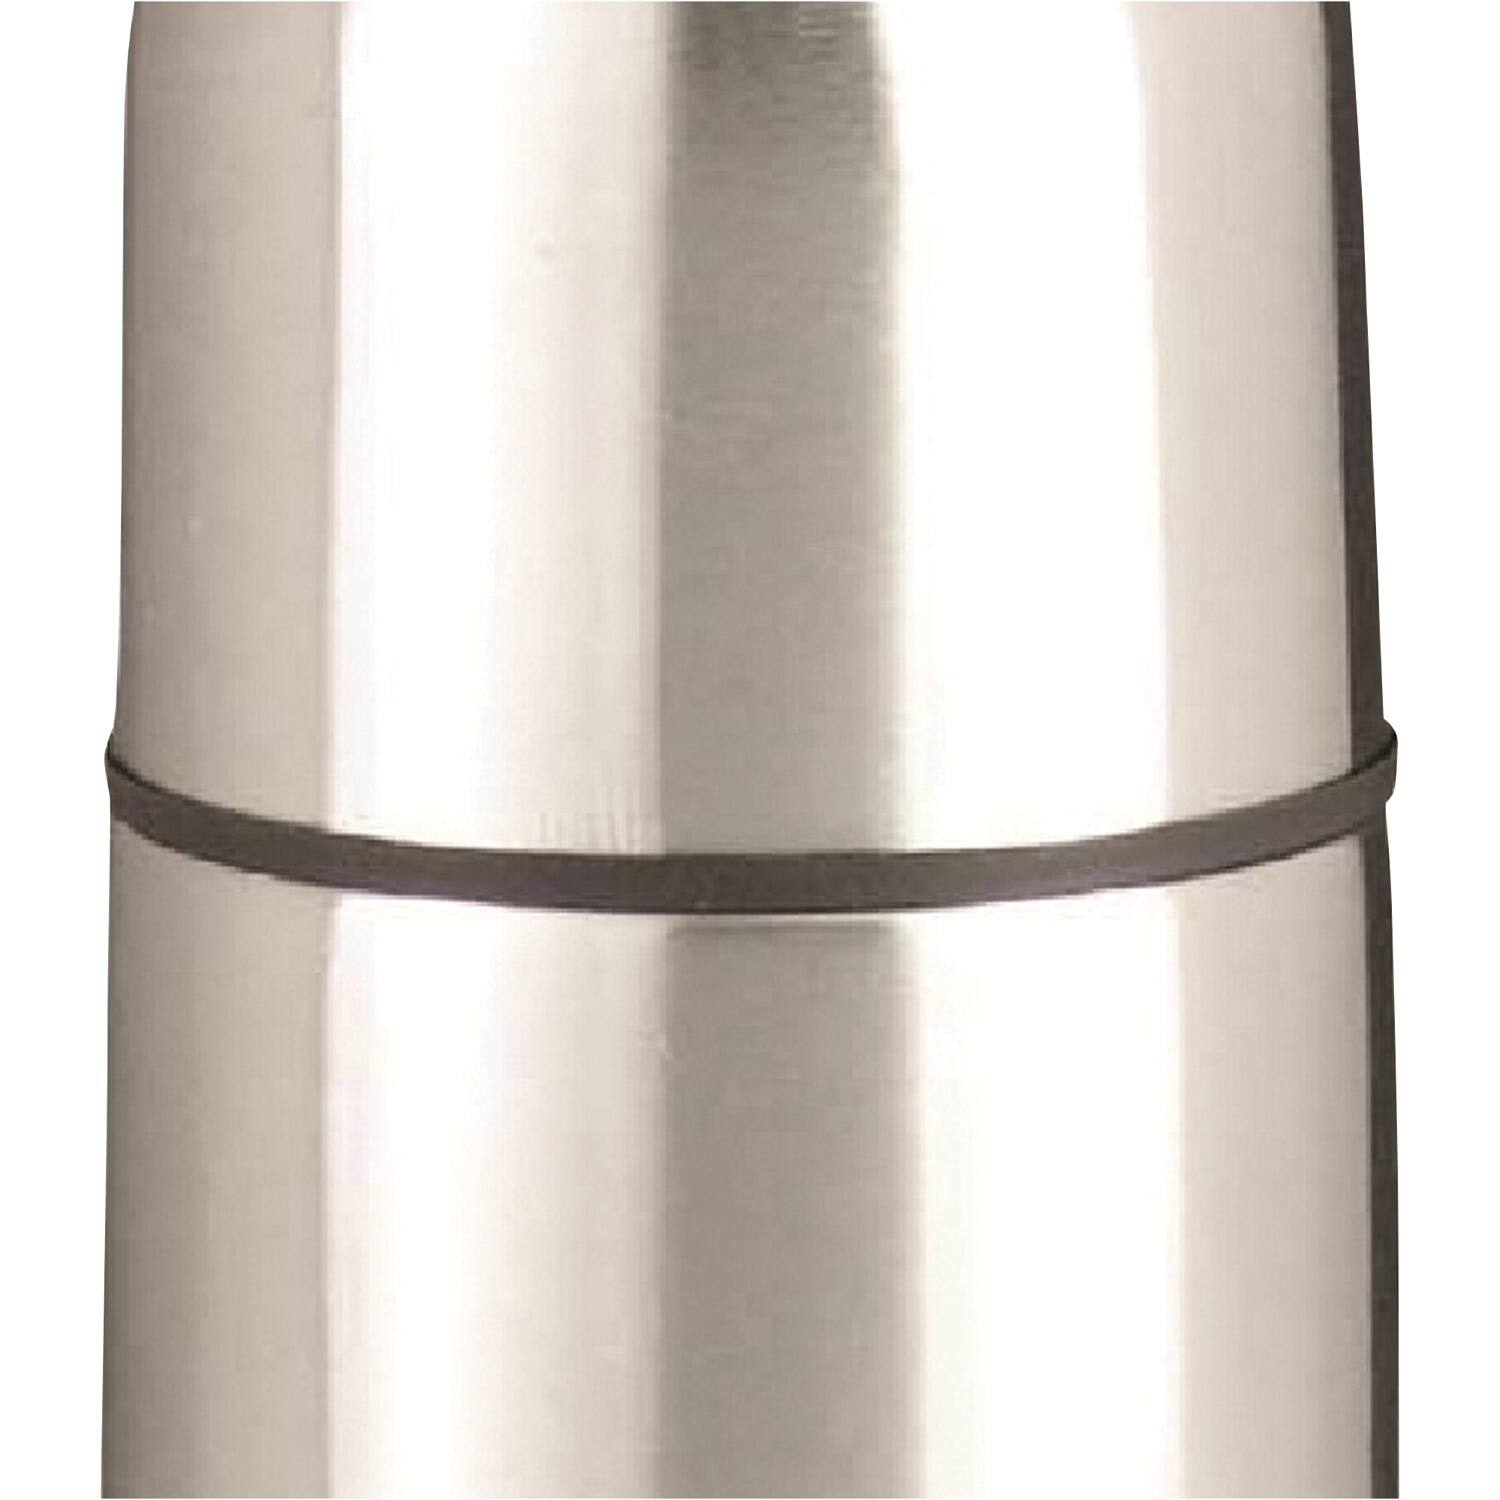 Brentwood 16oz. Vacuum-Insulated Stainless Steel Coffee Thermos